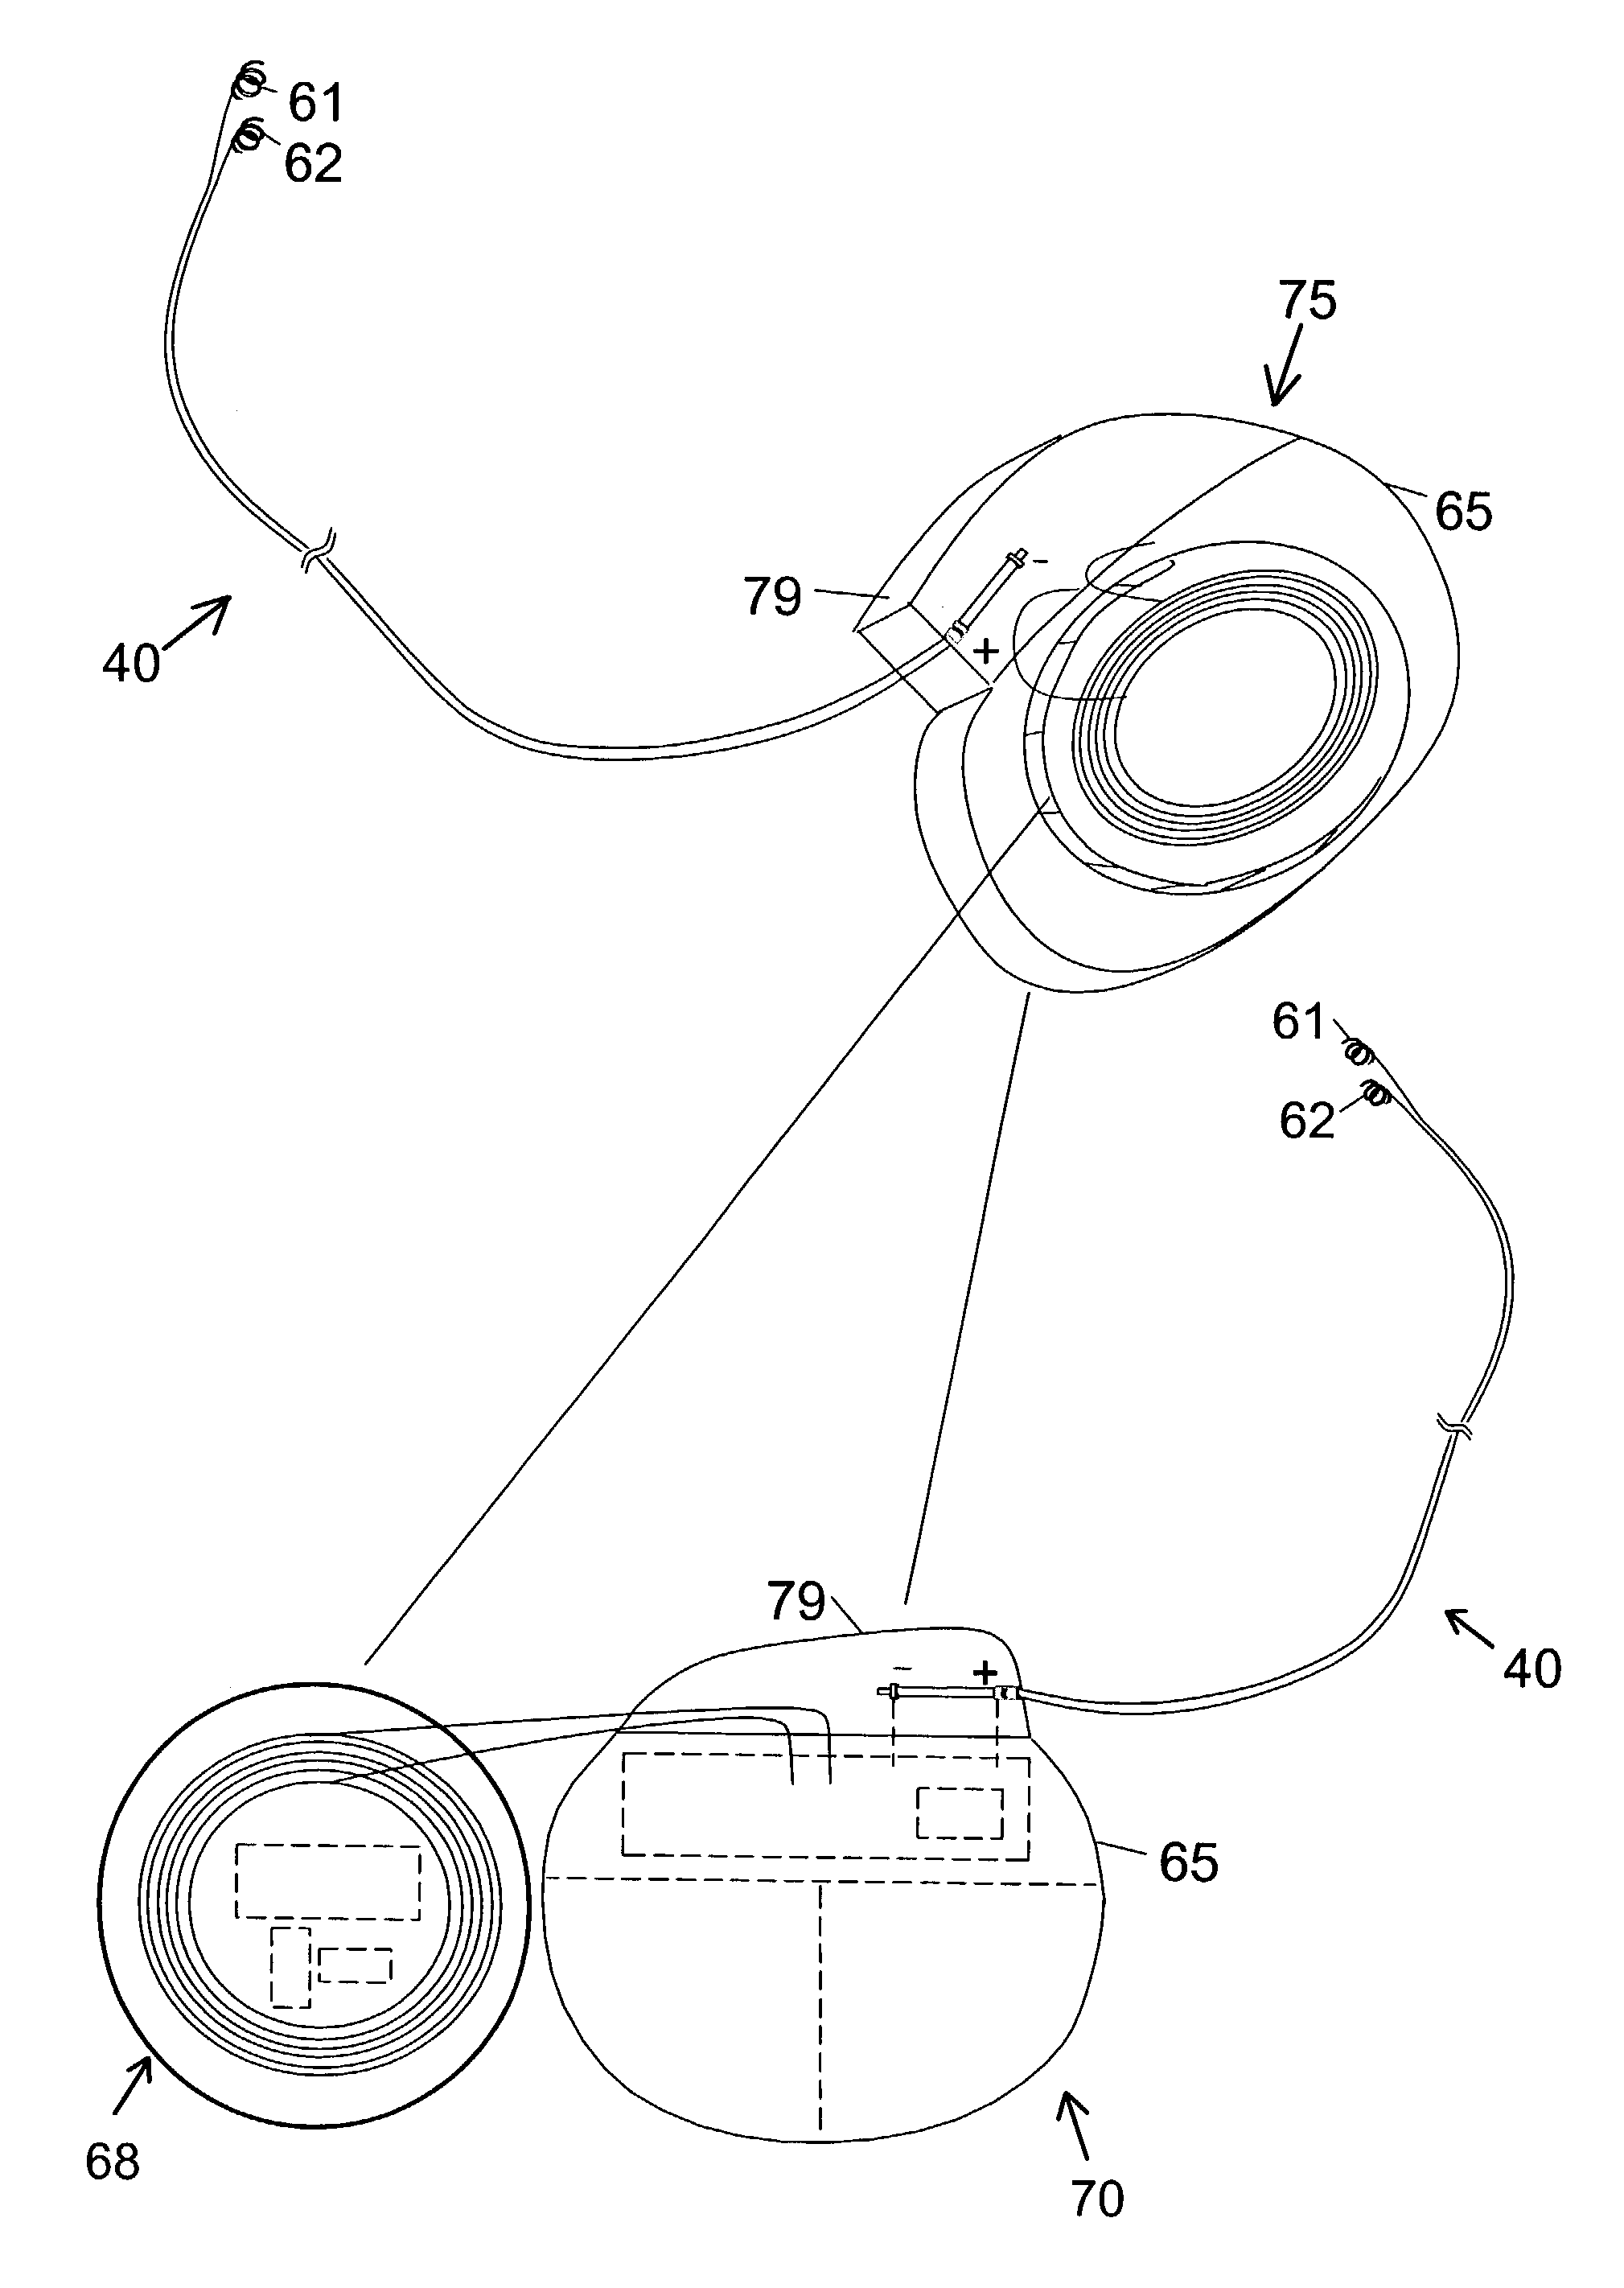 Method and system for providing pulsed electrical stimulation to a craniel nerve of a patient to provide therapy for neurological and neuropsychiatric disorders